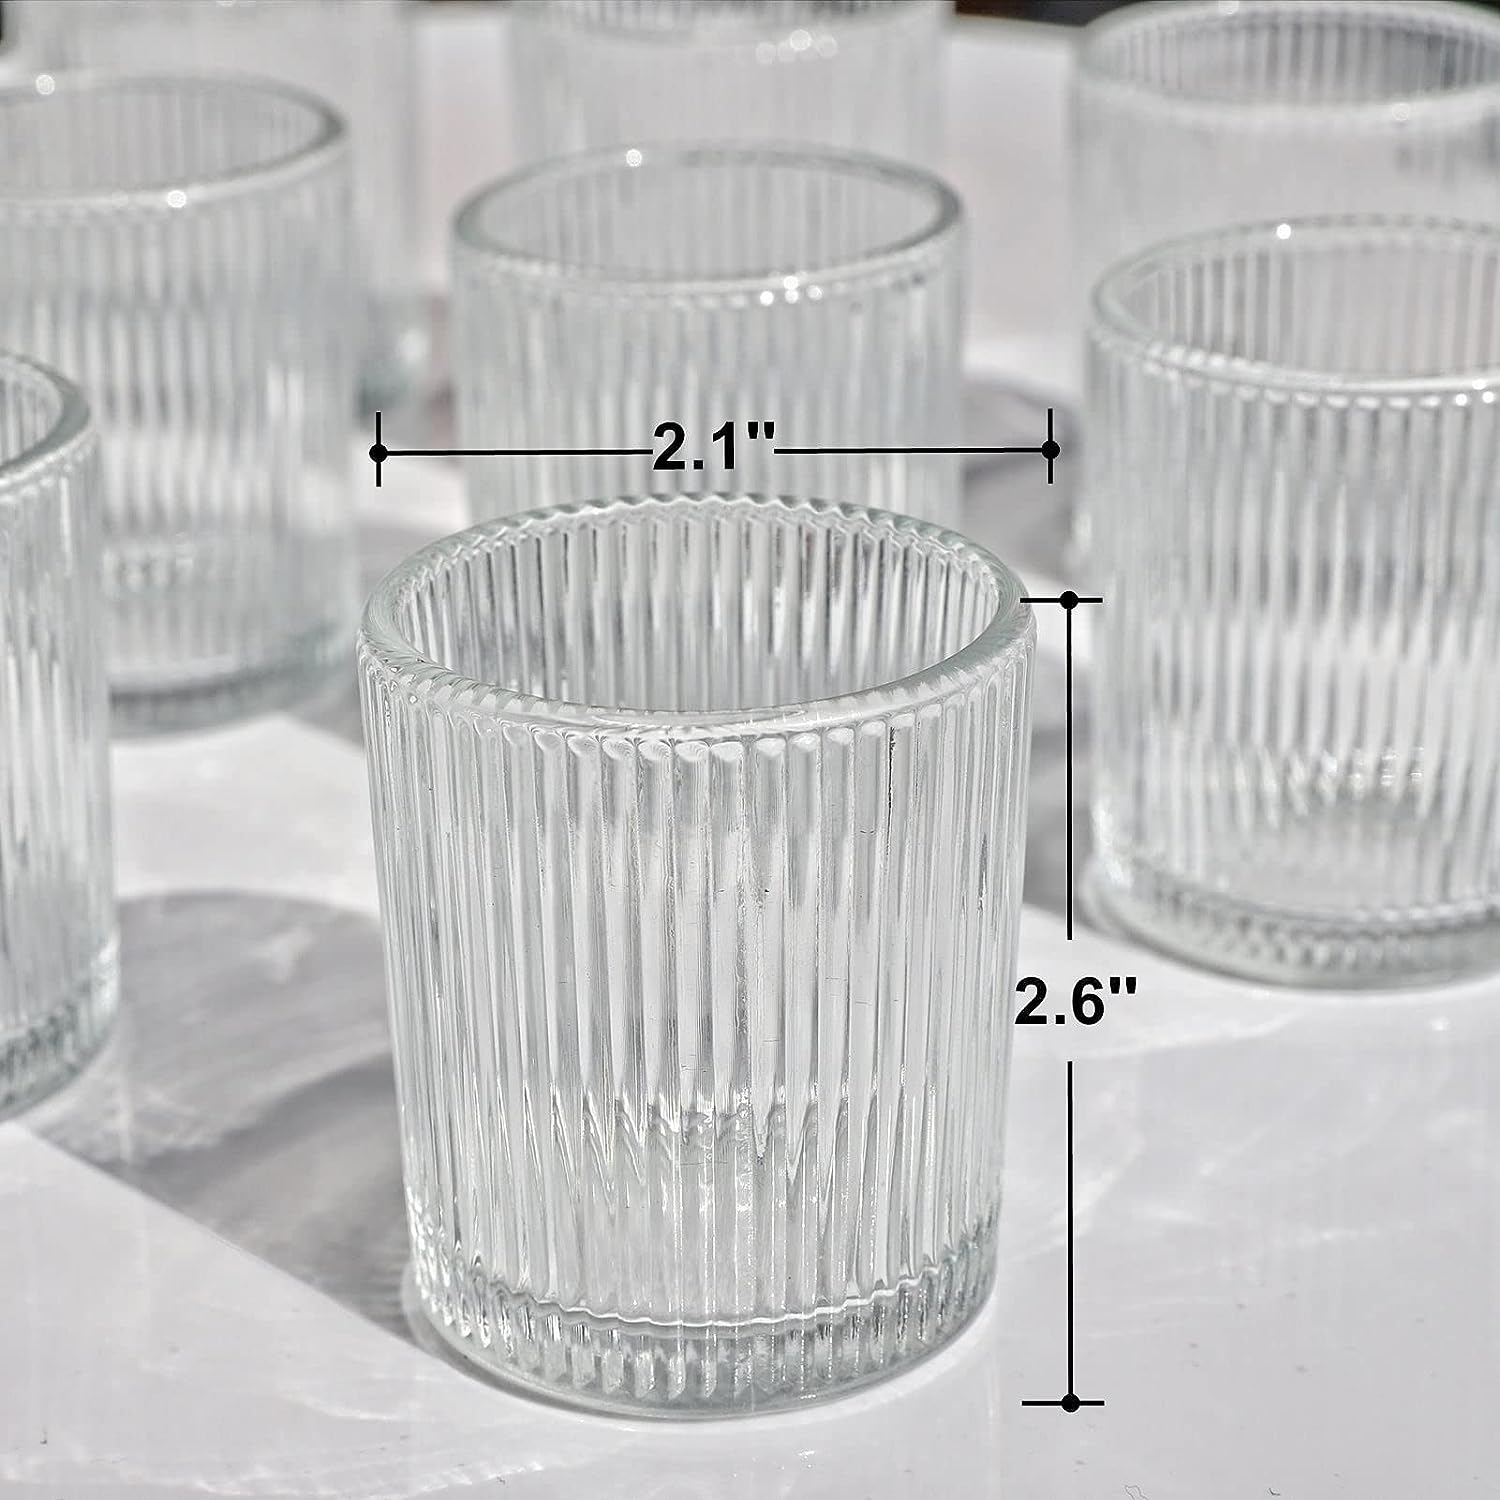 Vohocandle Clear Tea Light Candle Holders Set of 12, Glass Tealight Holders for Table Centerpiece 5 cm x 3.5 cm, Votive Candle Holder for Wedding